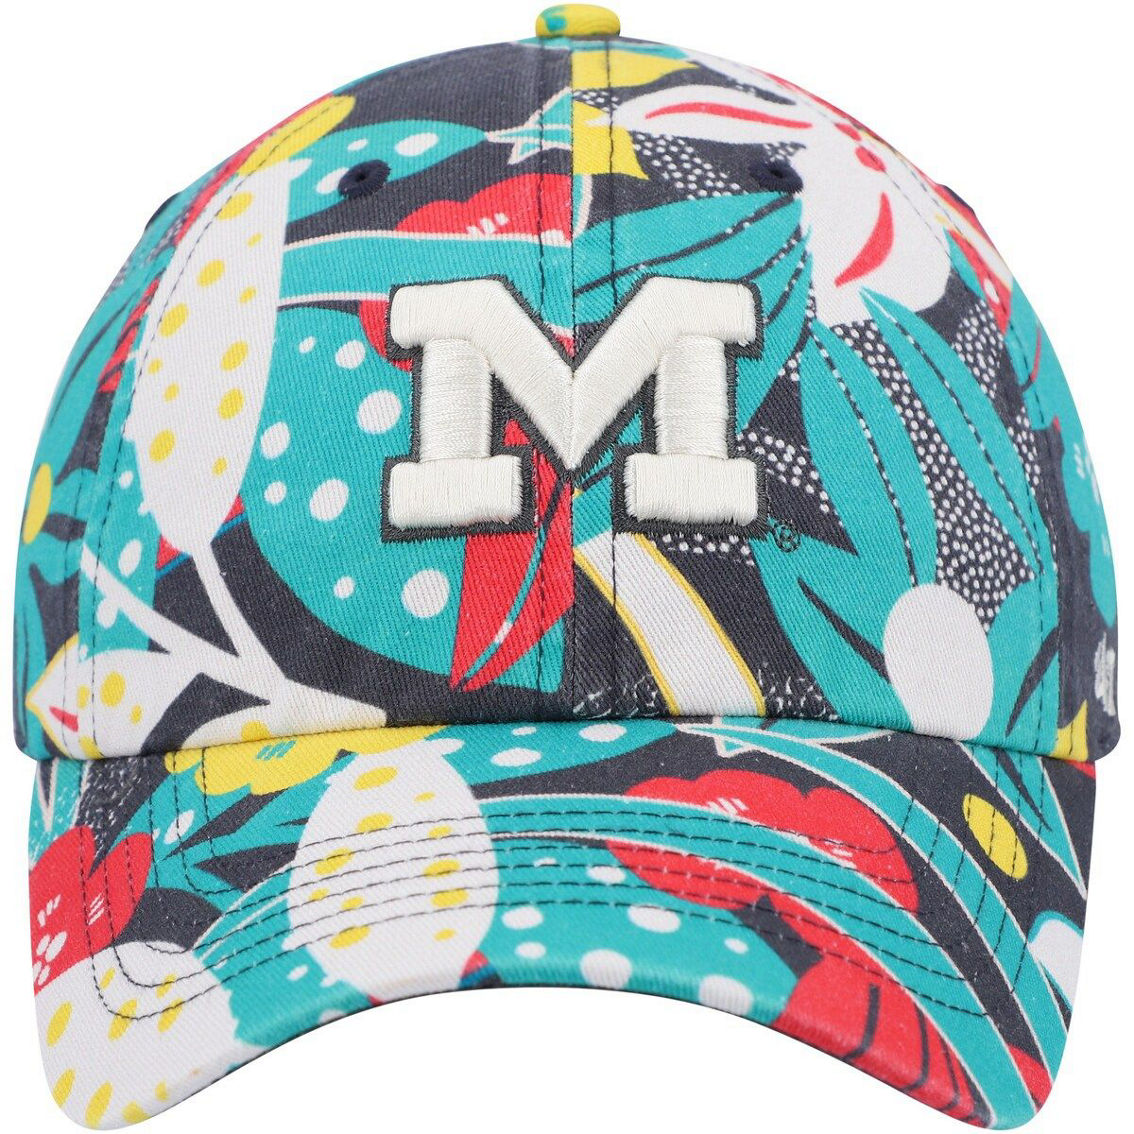 '47 Women's Charcoal Michigan Wolverines Plumeria Clean Up Adjustable Hat - Image 3 of 4